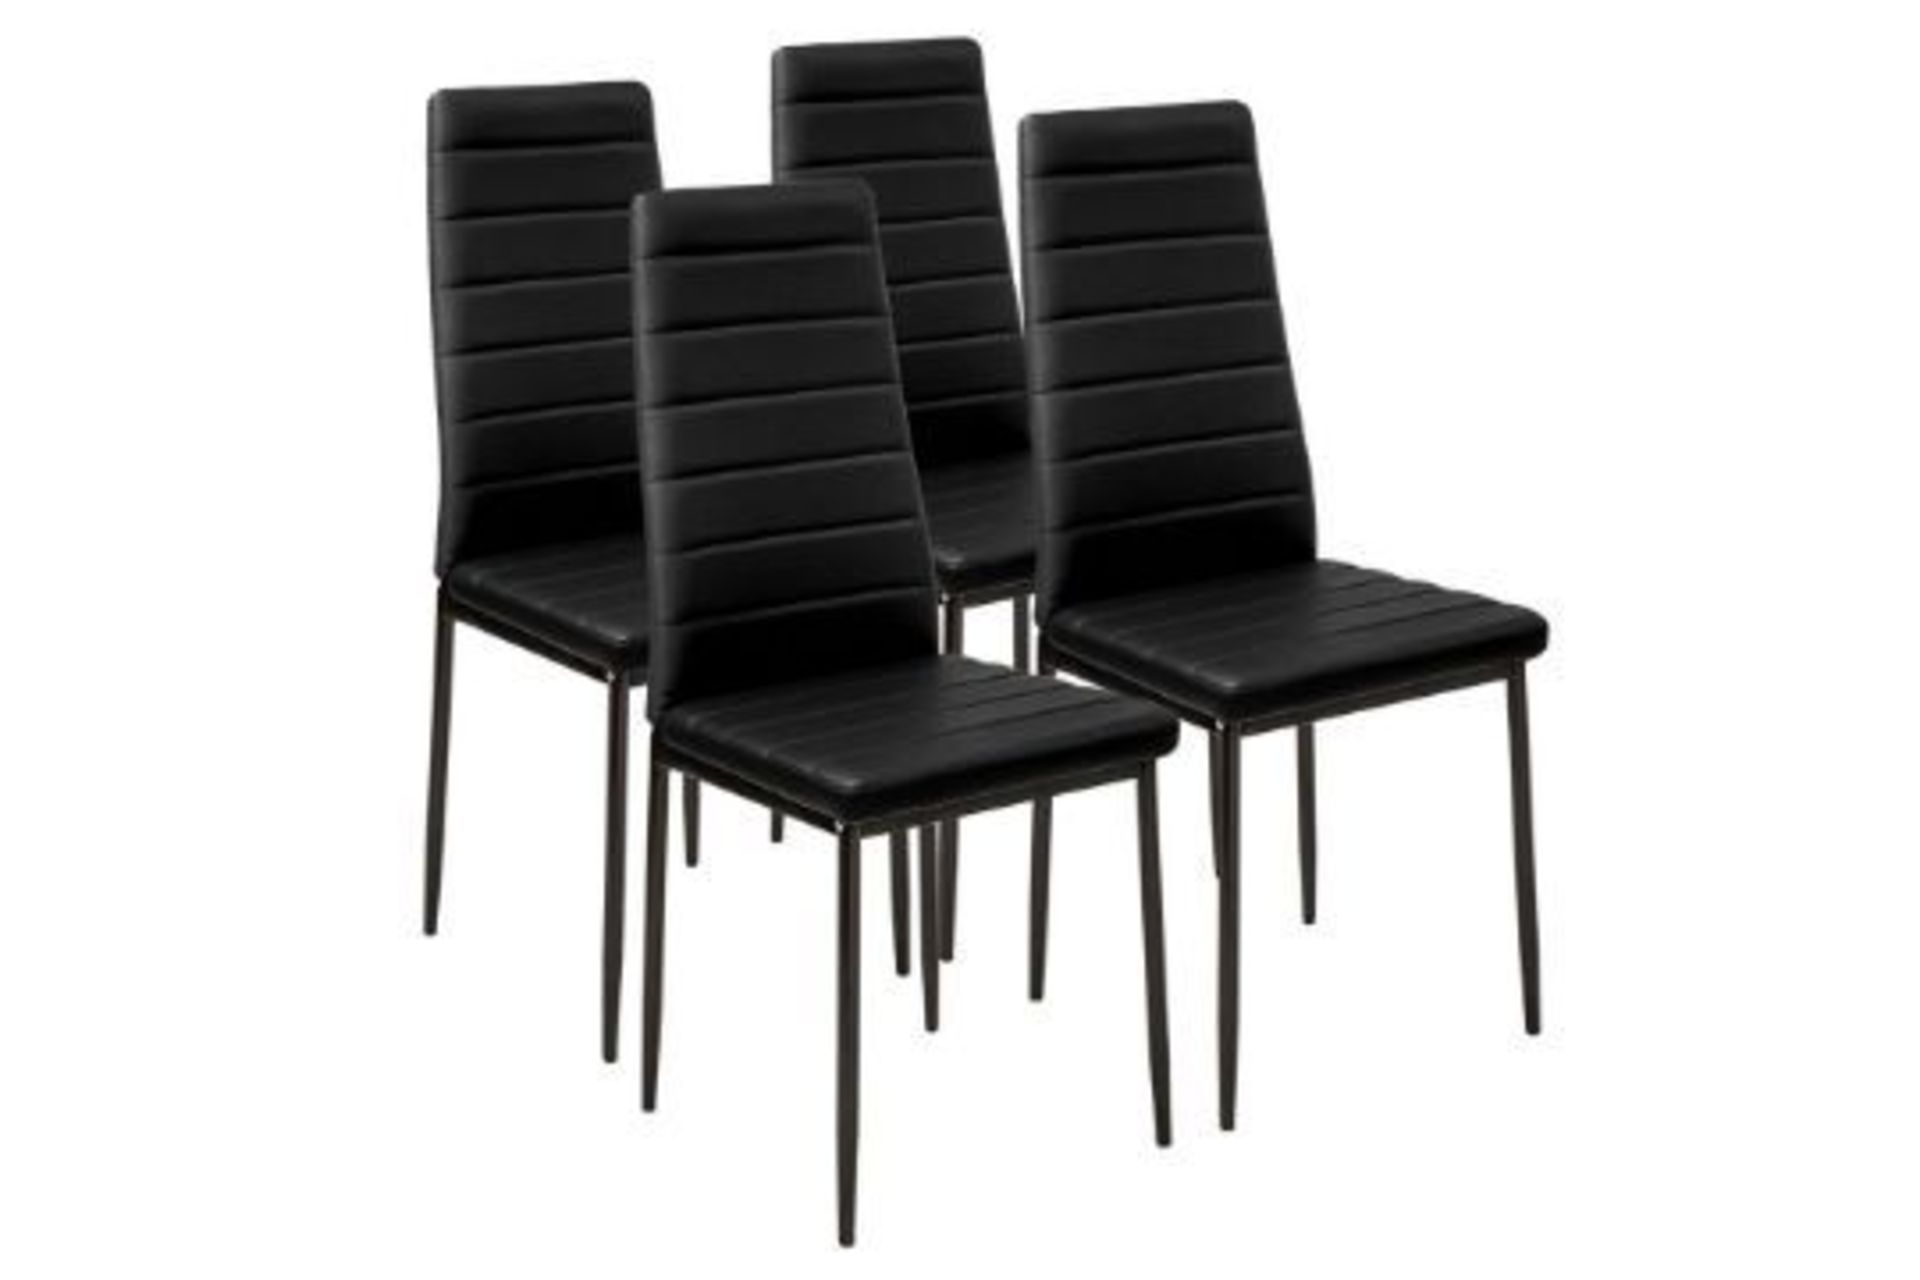 PALLET TO CONTAIN 24 X NEW BOXED Modern Synthetic Leather Dining Chairs In Black. RRP £99.99 each,